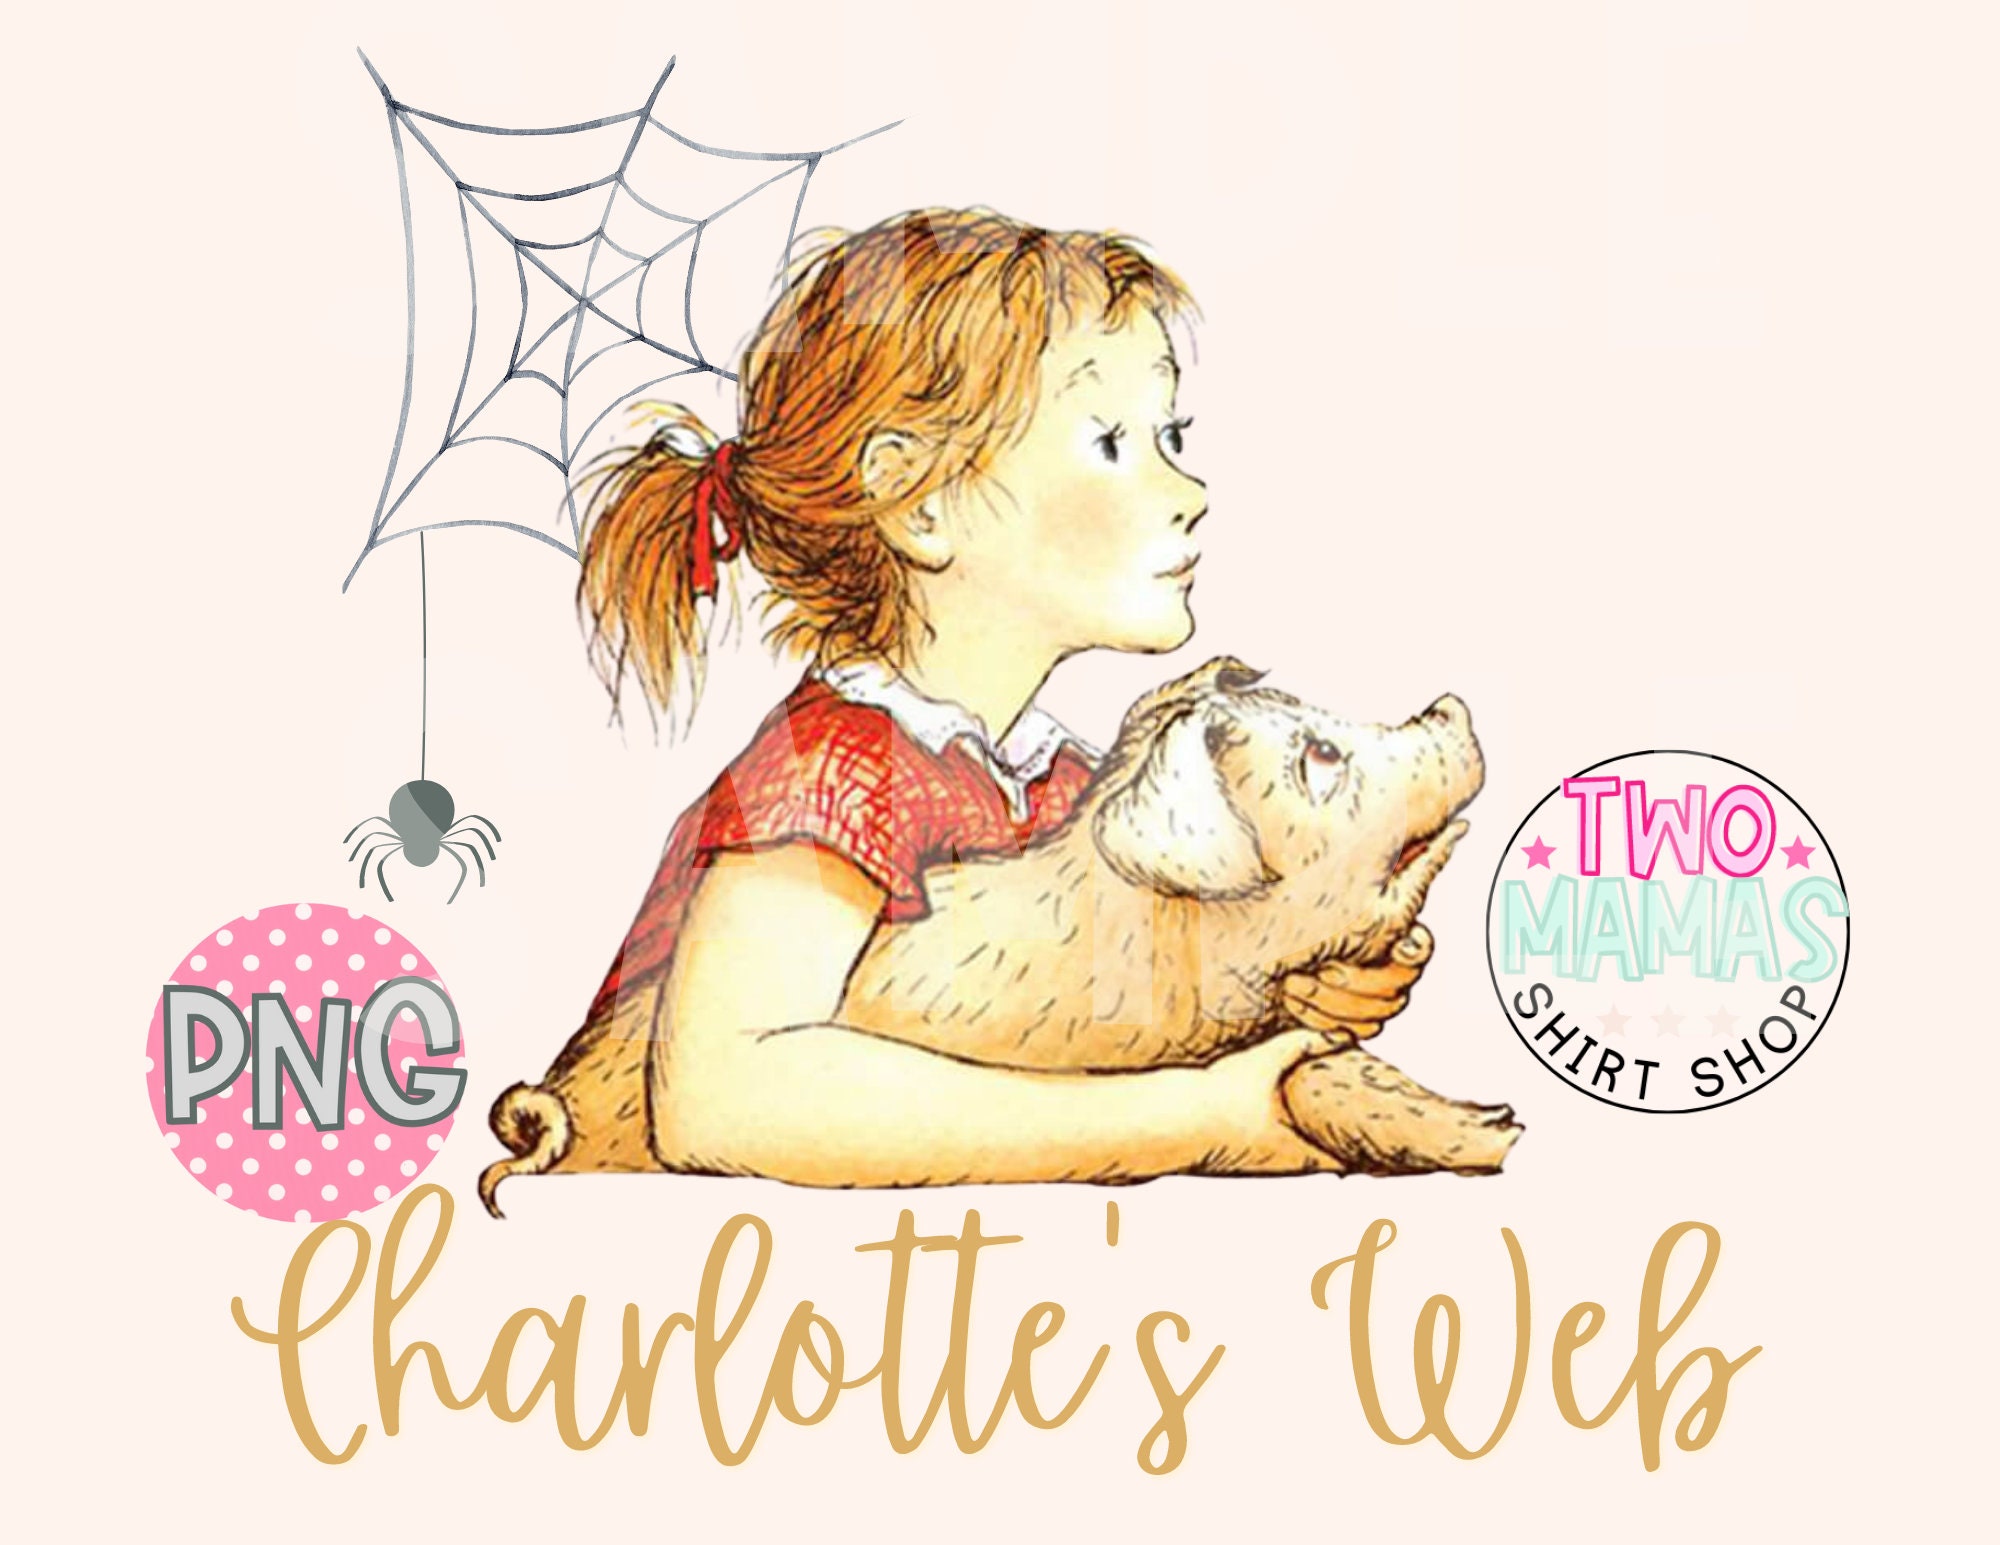 Big Wood Boards - The Wiltshire Collection - Charlotte's Web Monogramming &  Gifts